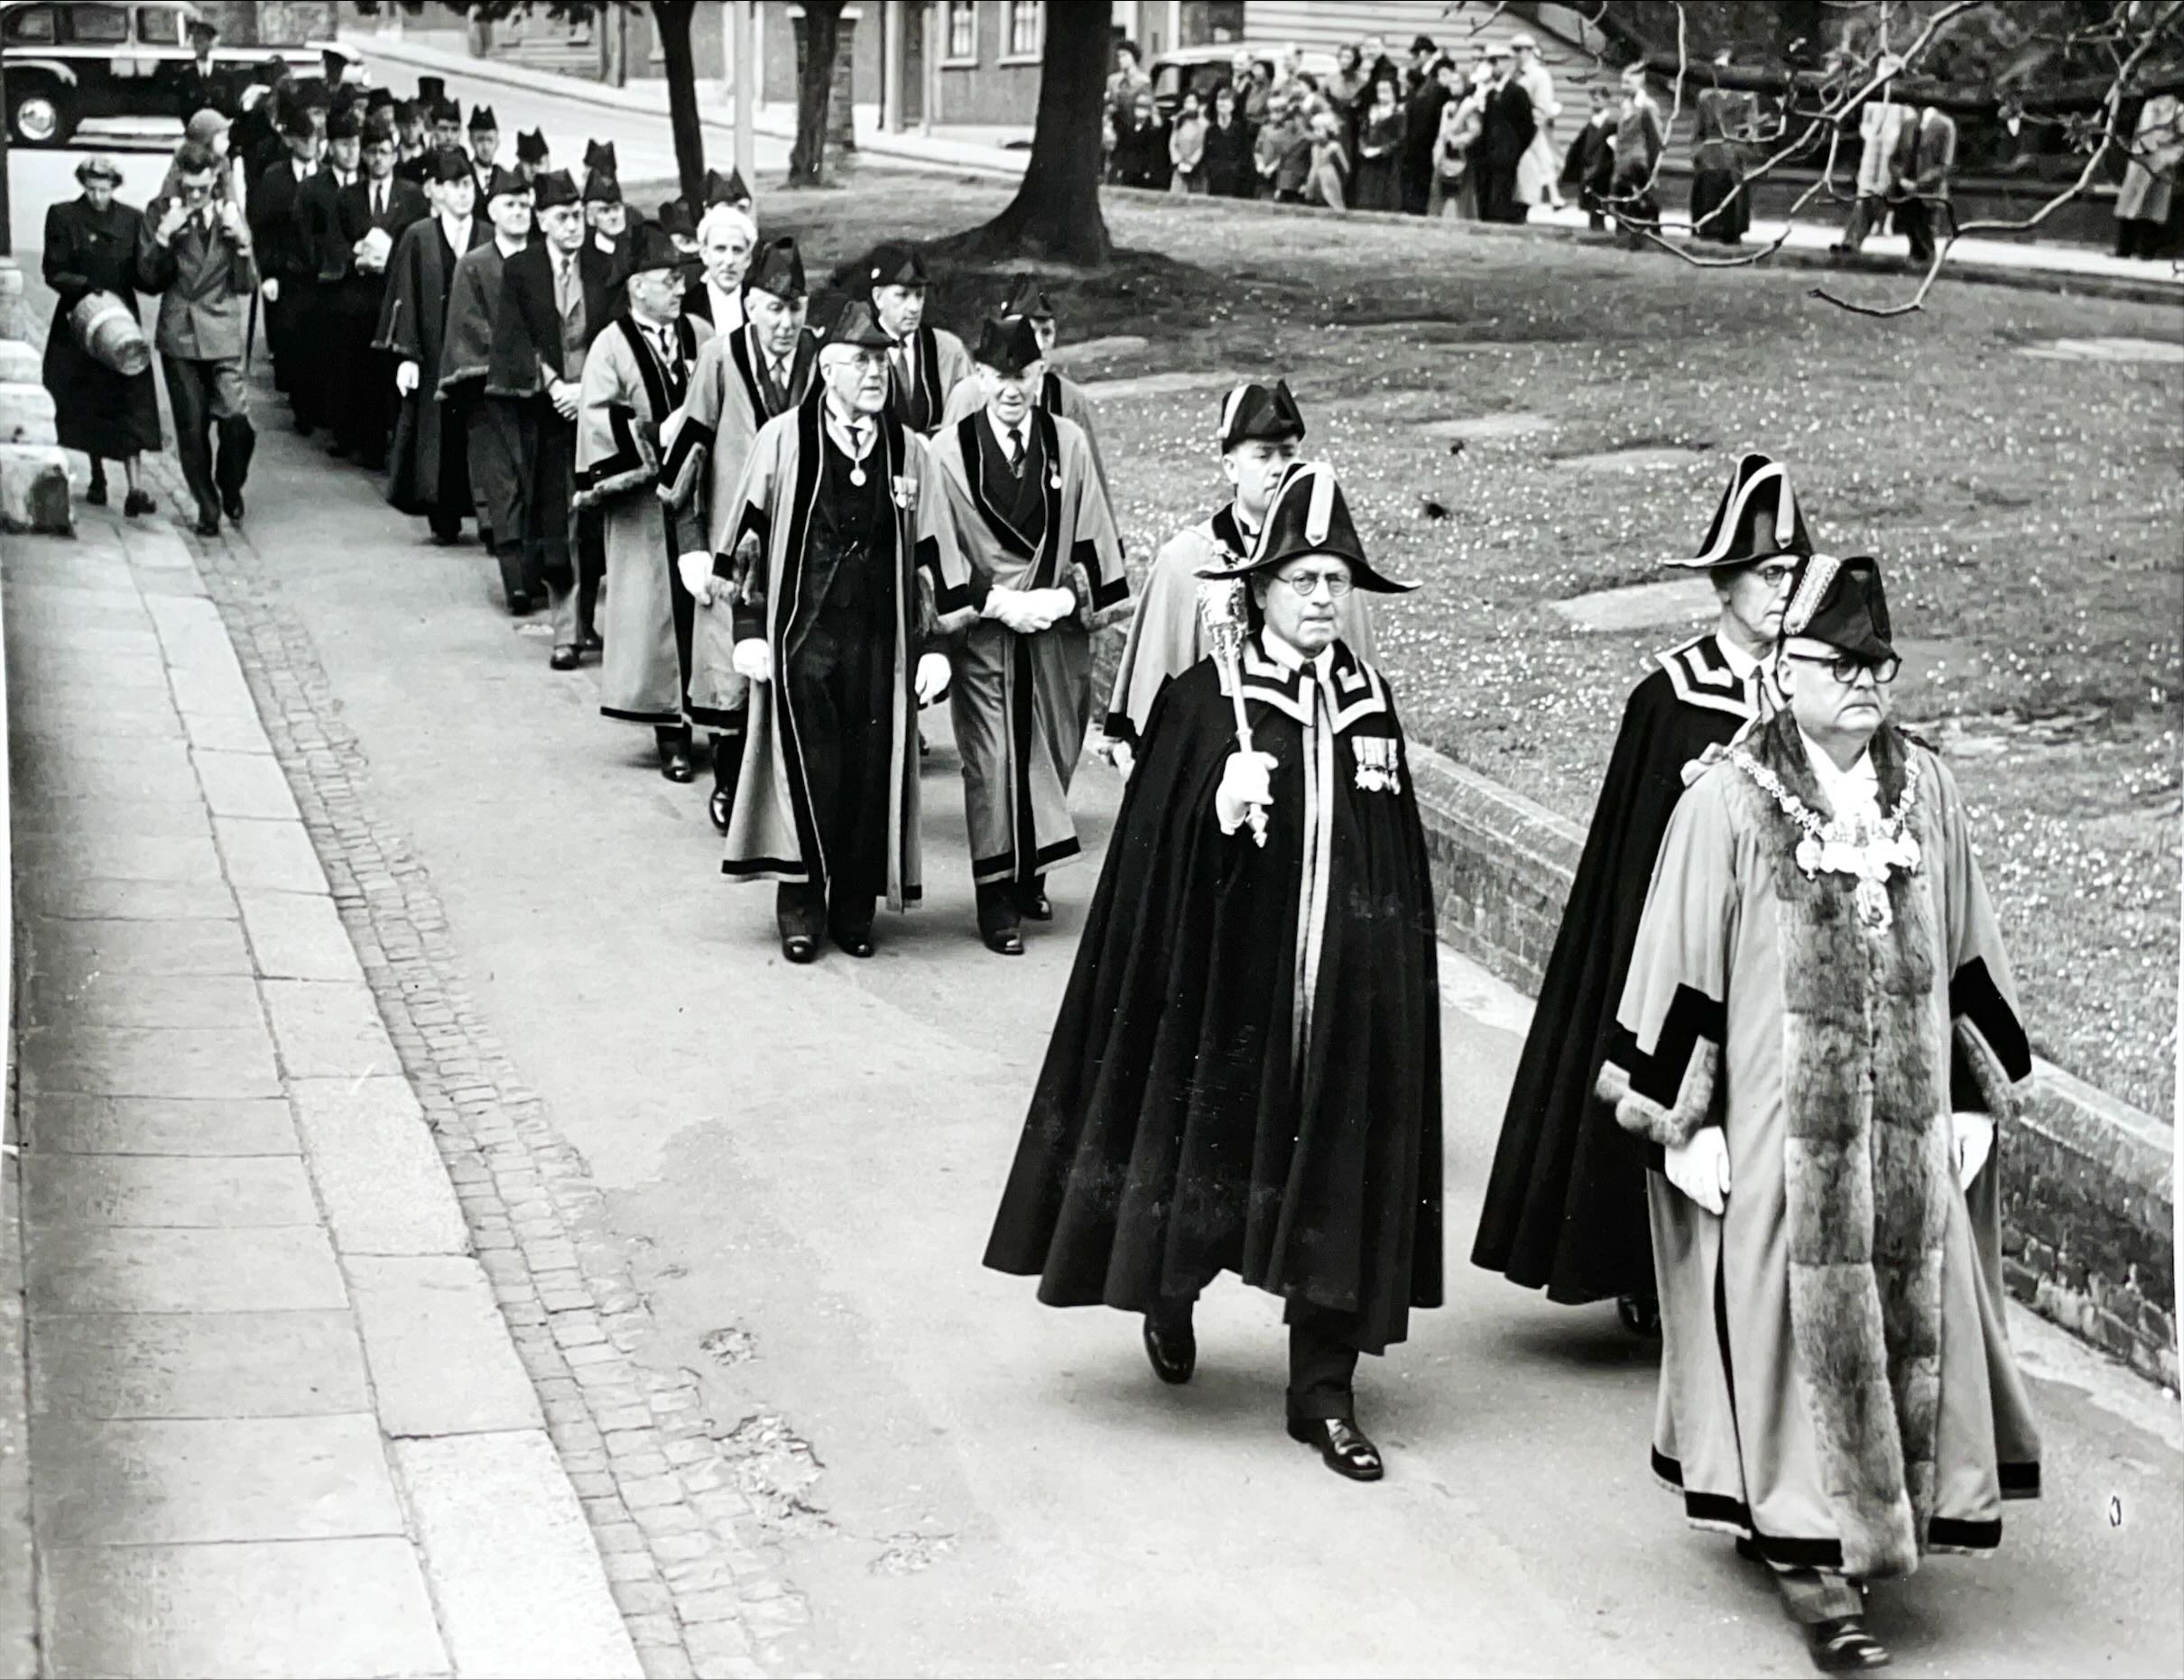 The Mayor of Rochester returning to the Guildhall after Coronation Civic Service, June 1953